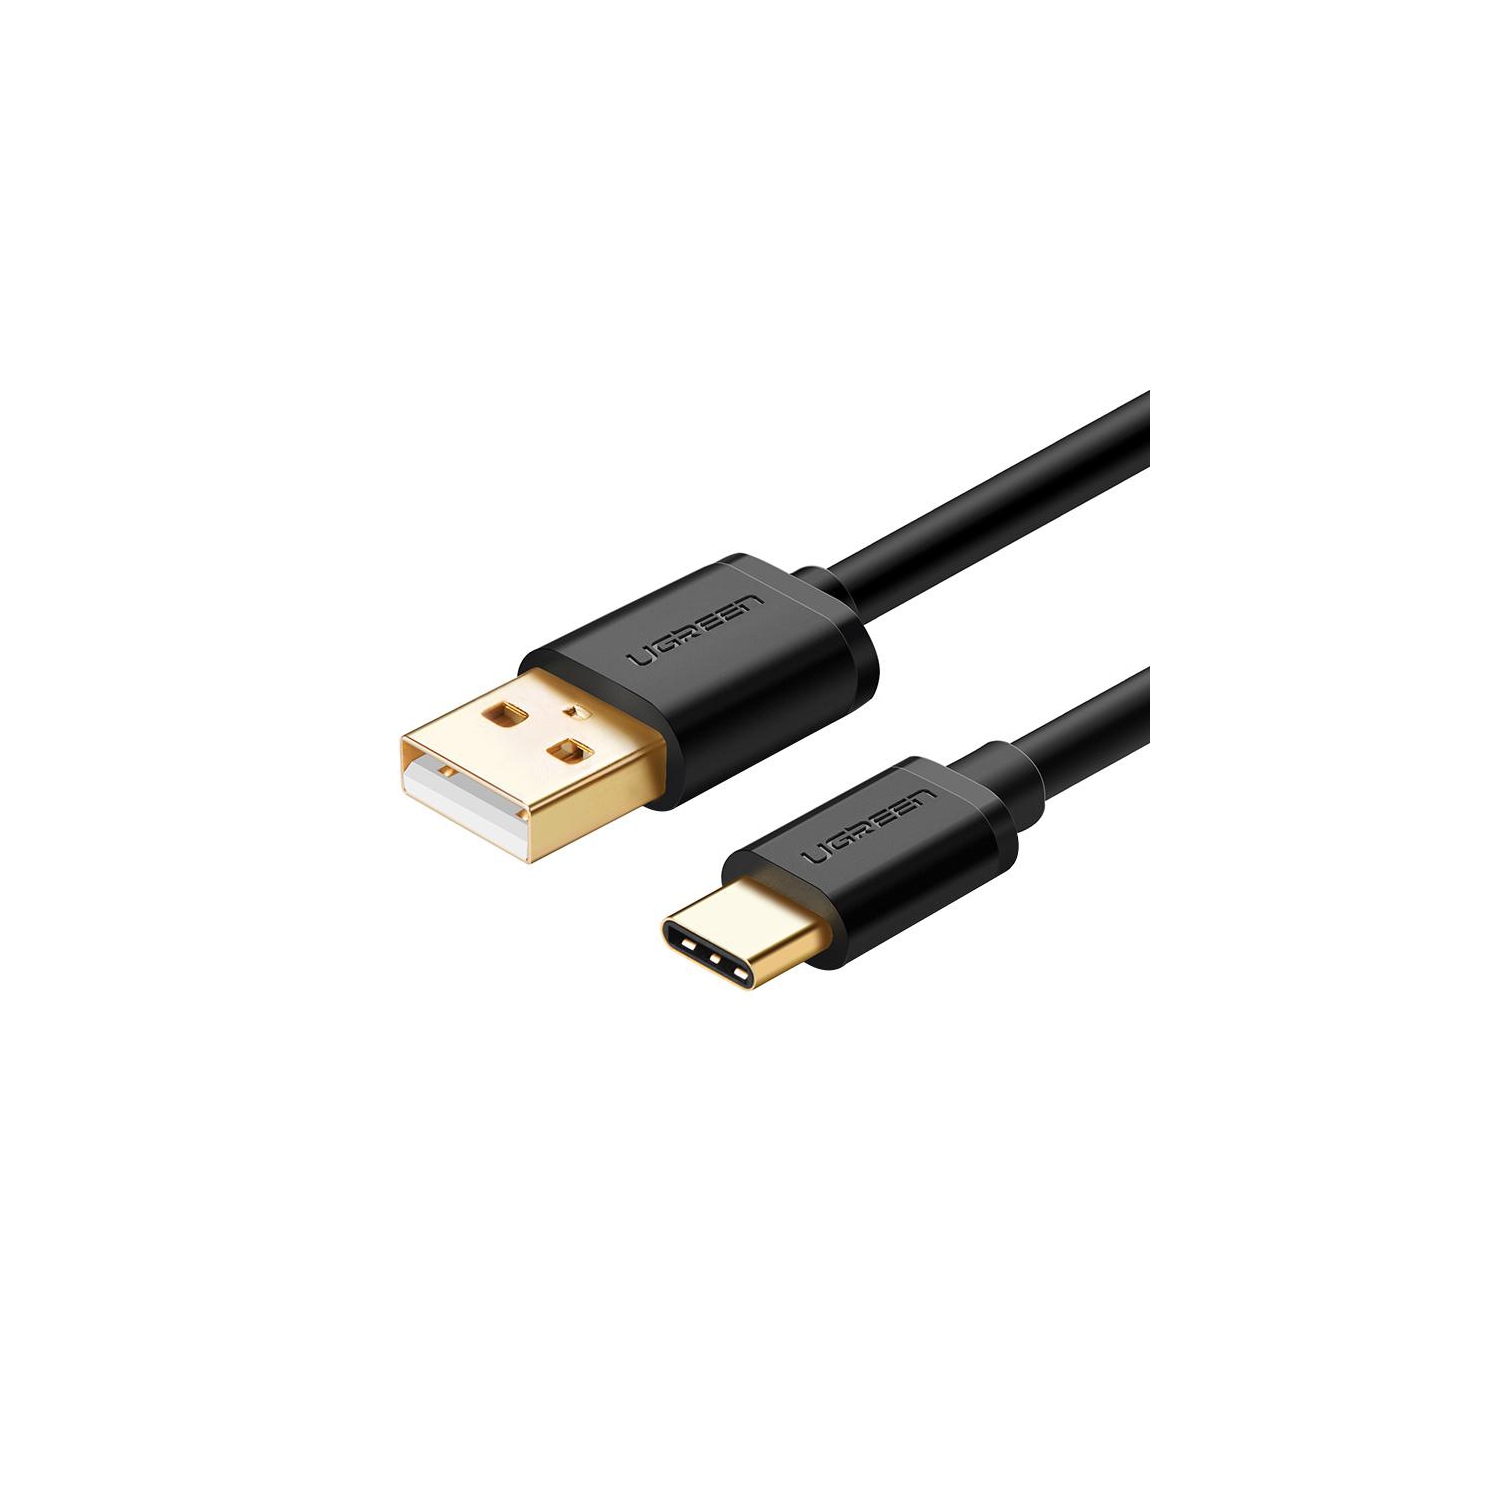 UGREEN USB 2.0 Type A Male to USB 3.1 Type-C Male Charge Sync Cable 2822AWG, Gold-plated